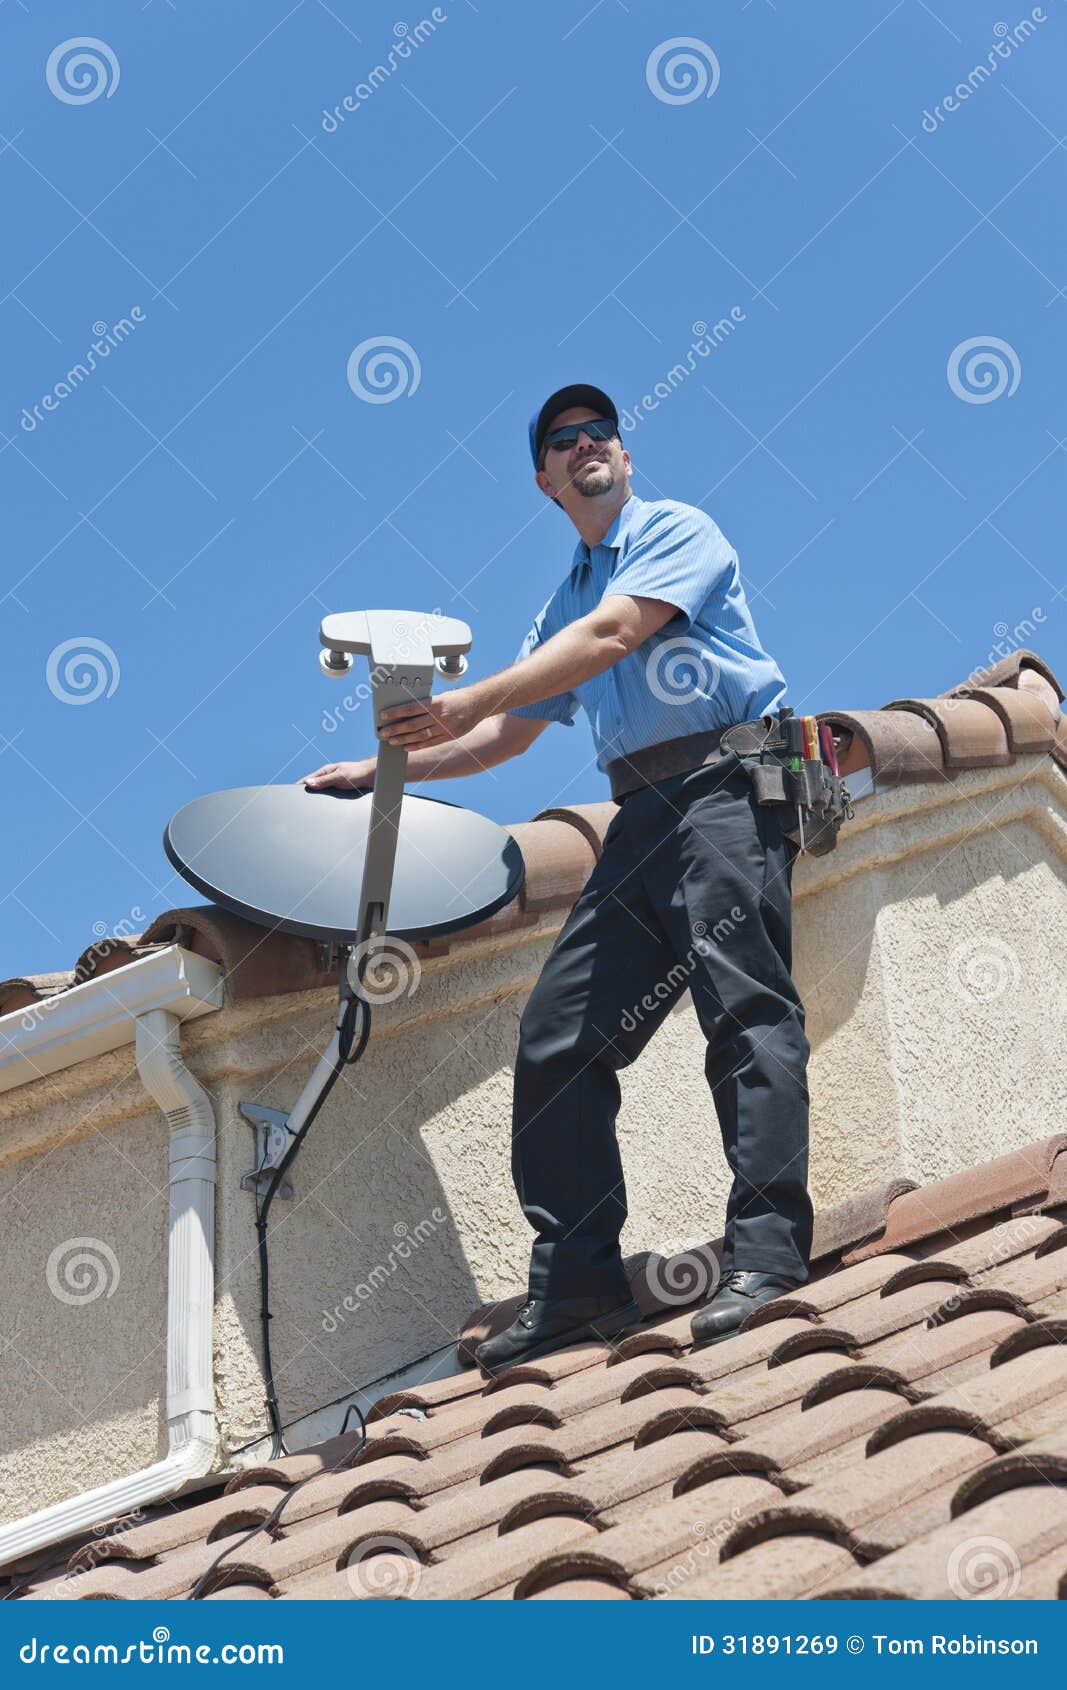 How To Install Satellite Dish On Roof